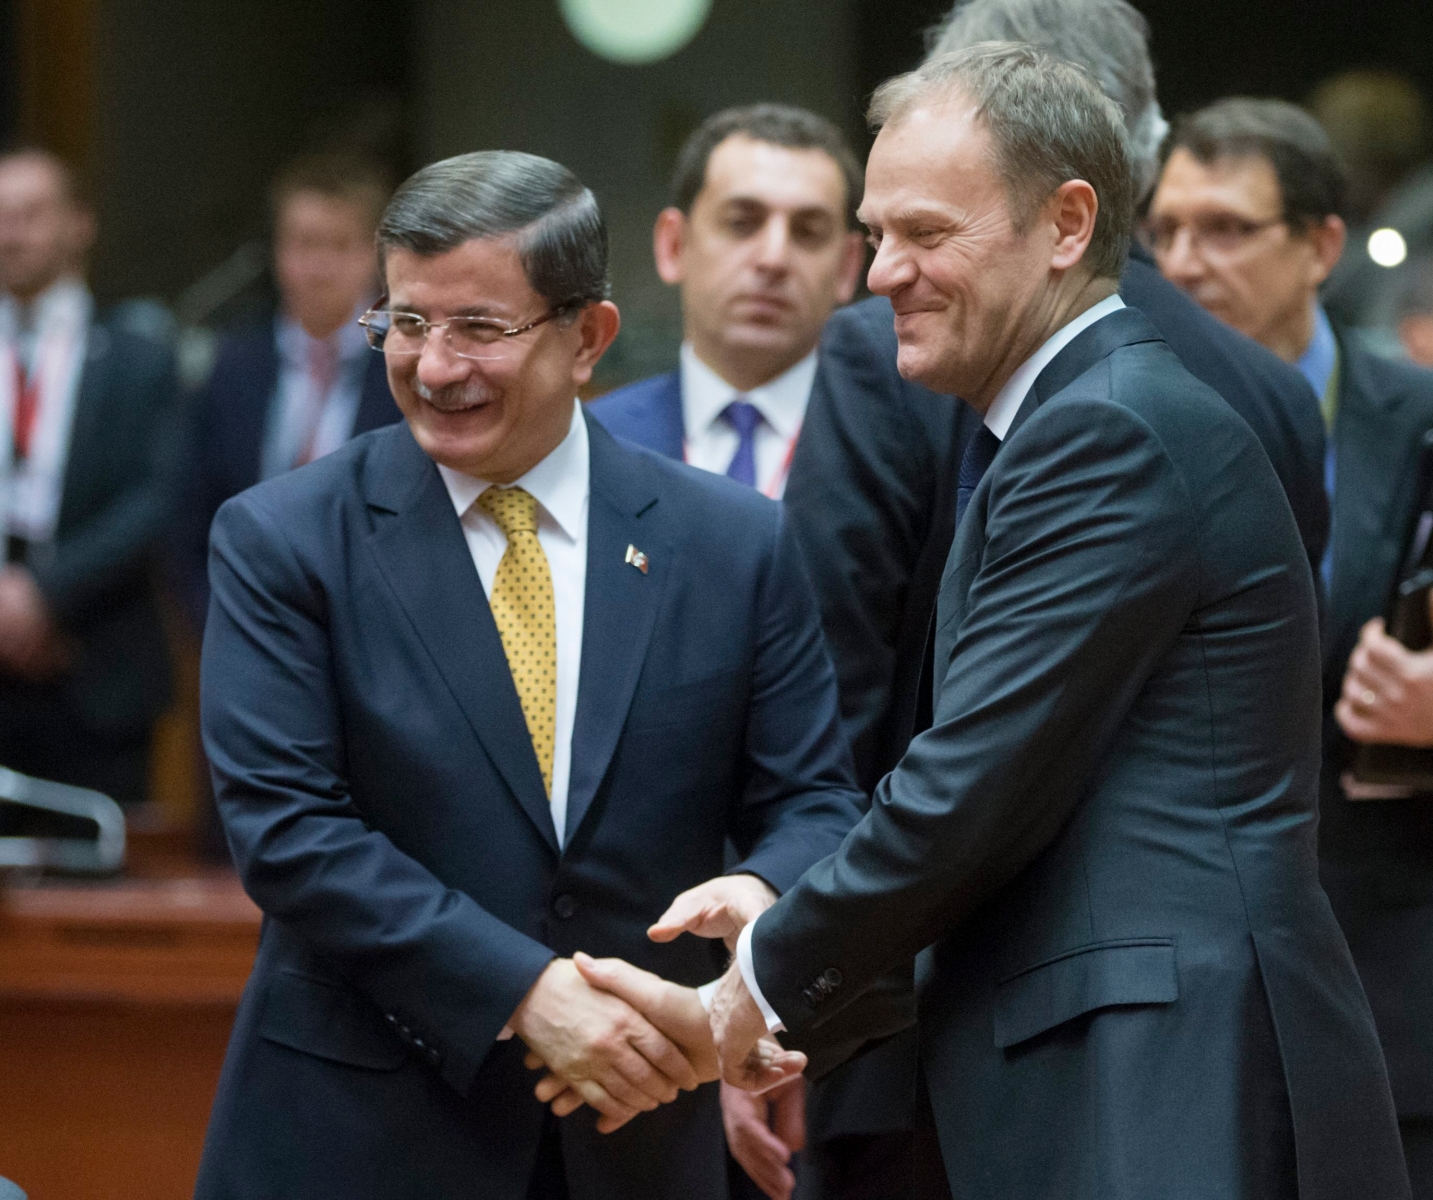 epa05218535 Turkish Prime Minister Ahmet Davutoglu (L) and European Council President Donald Tusk (R) shake hands during a meeting on the second day of the European Union leaders summit in Brussels, Belgium, 18 March 2016. EU leaders met to discuss a deal with Turkey that is aimed to tackle the migration crisis and curb migration into the bloc.  EPA/OLIVIER HOSLET BELGIUM EU SUMMIT